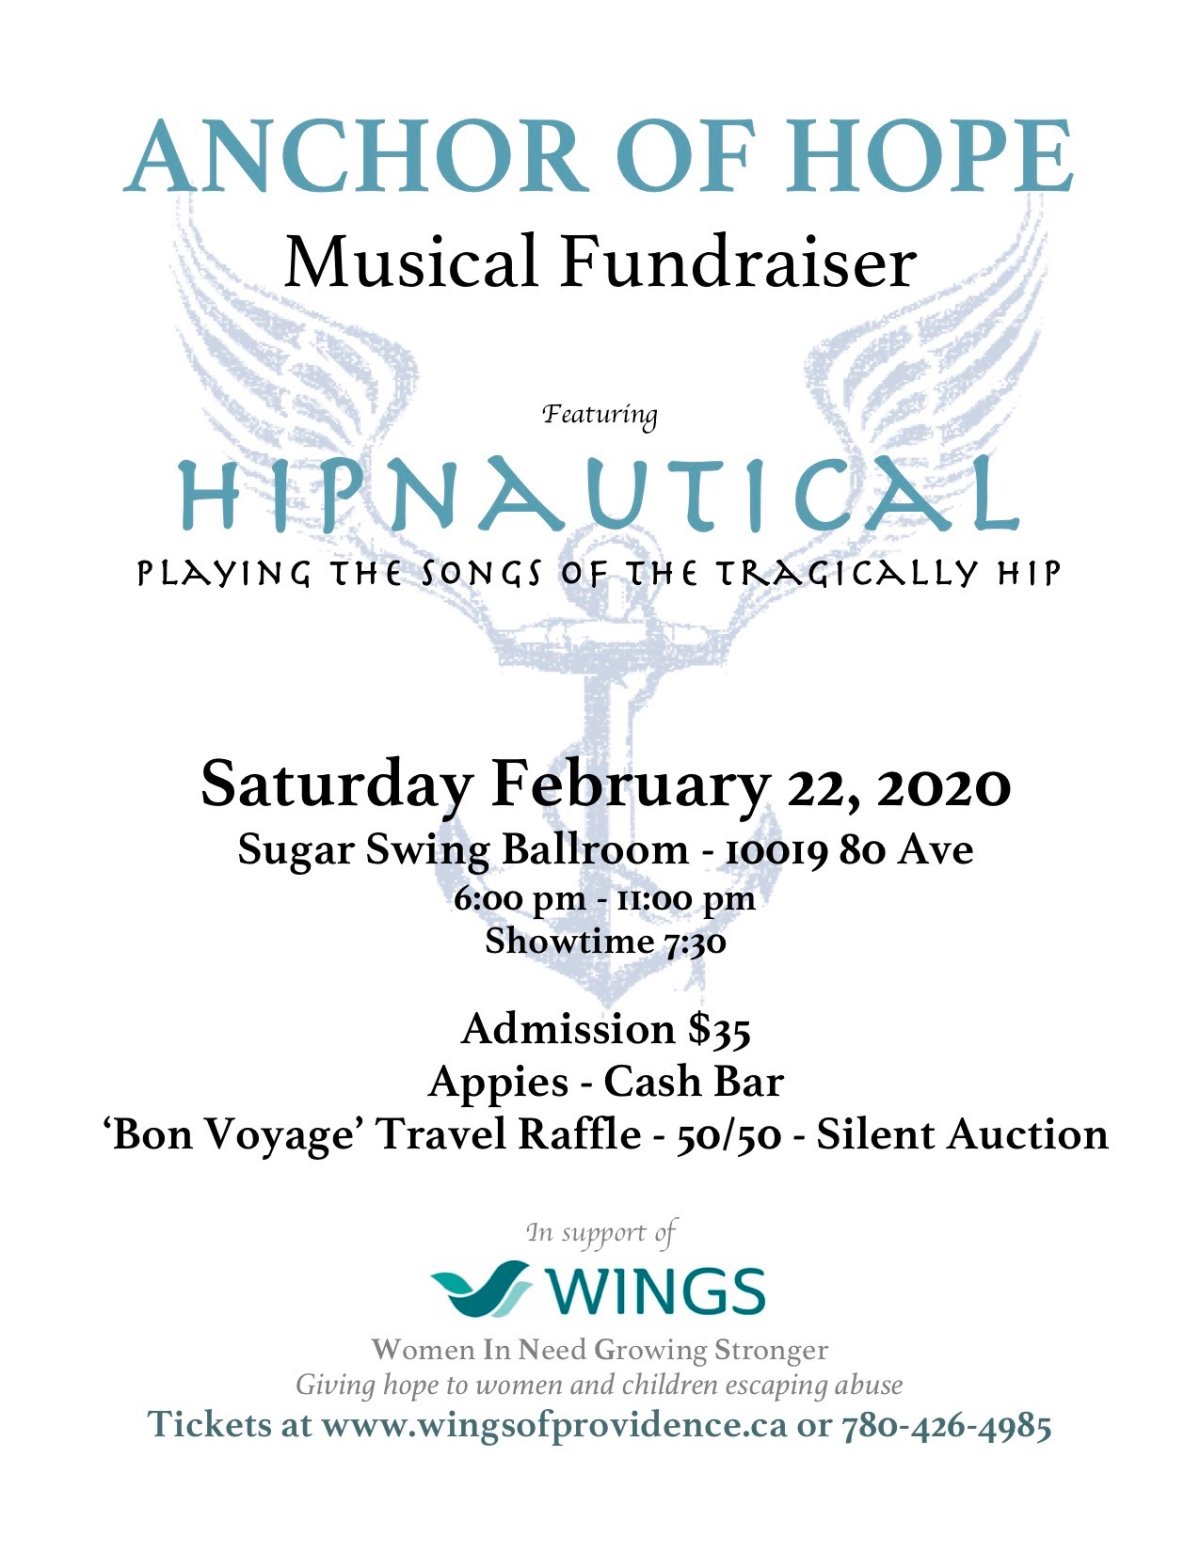 Anchor of Hope Musical Fundraiser - image